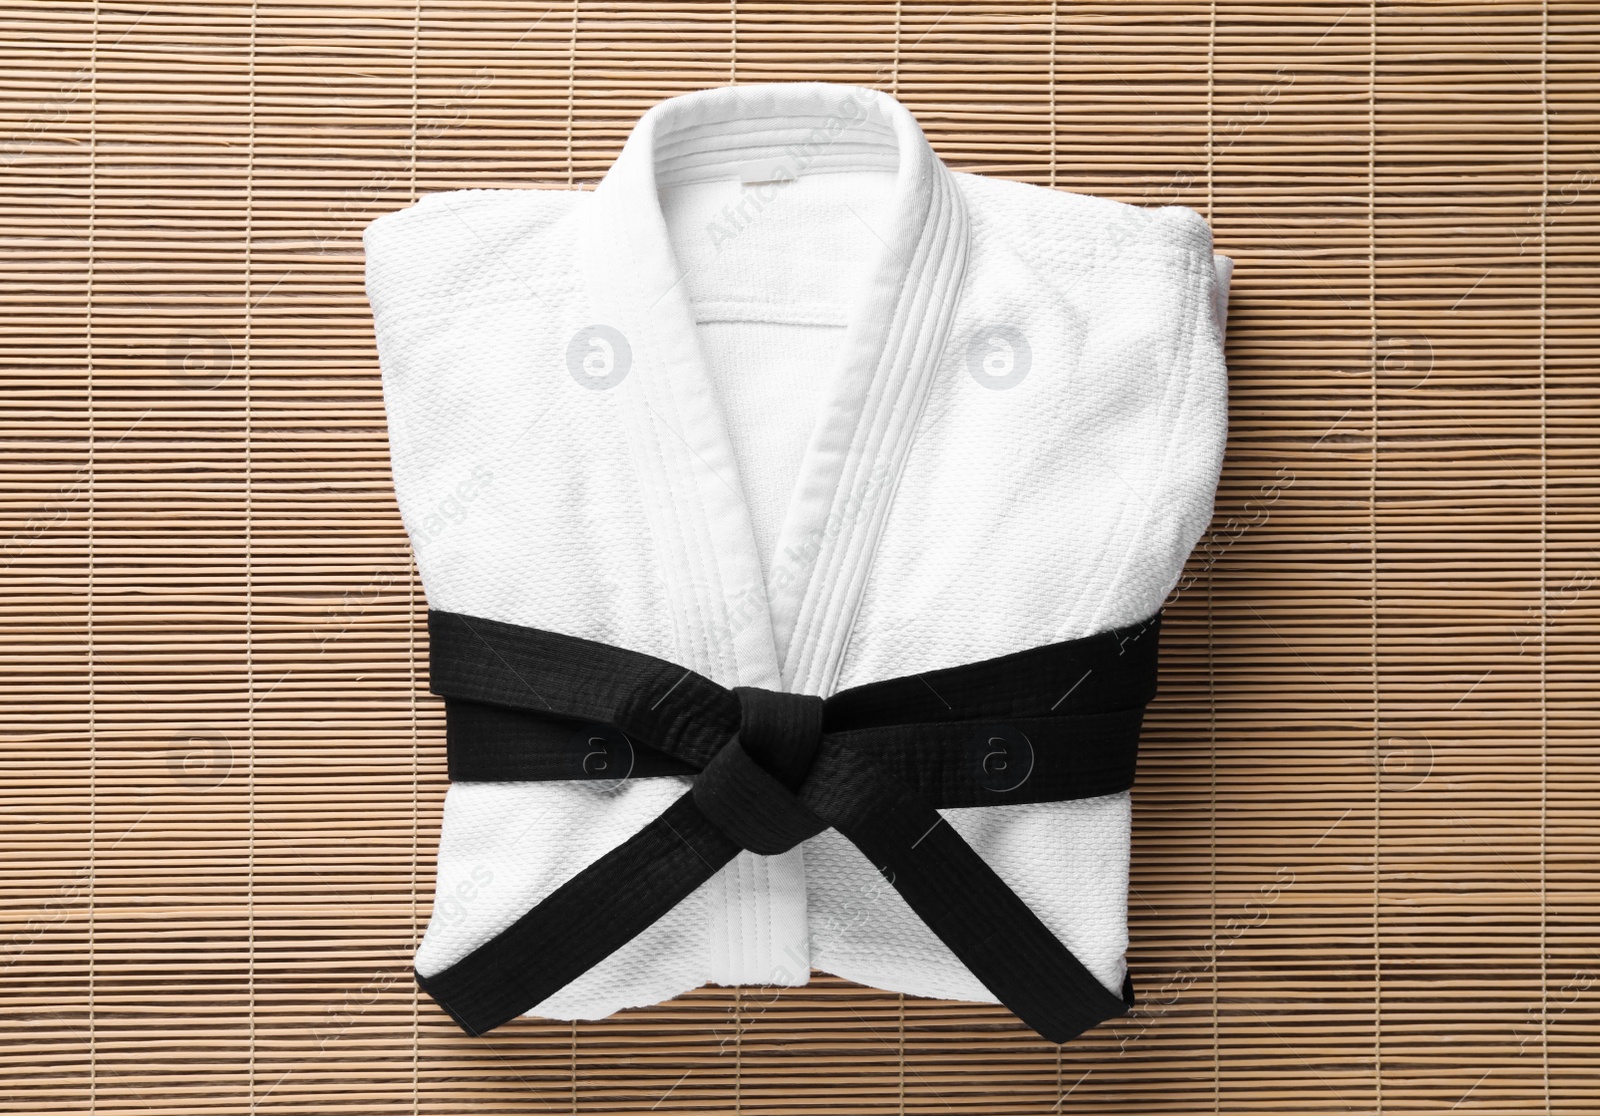 Photo of Martial arts uniform with black belt on bamboo mat, top view